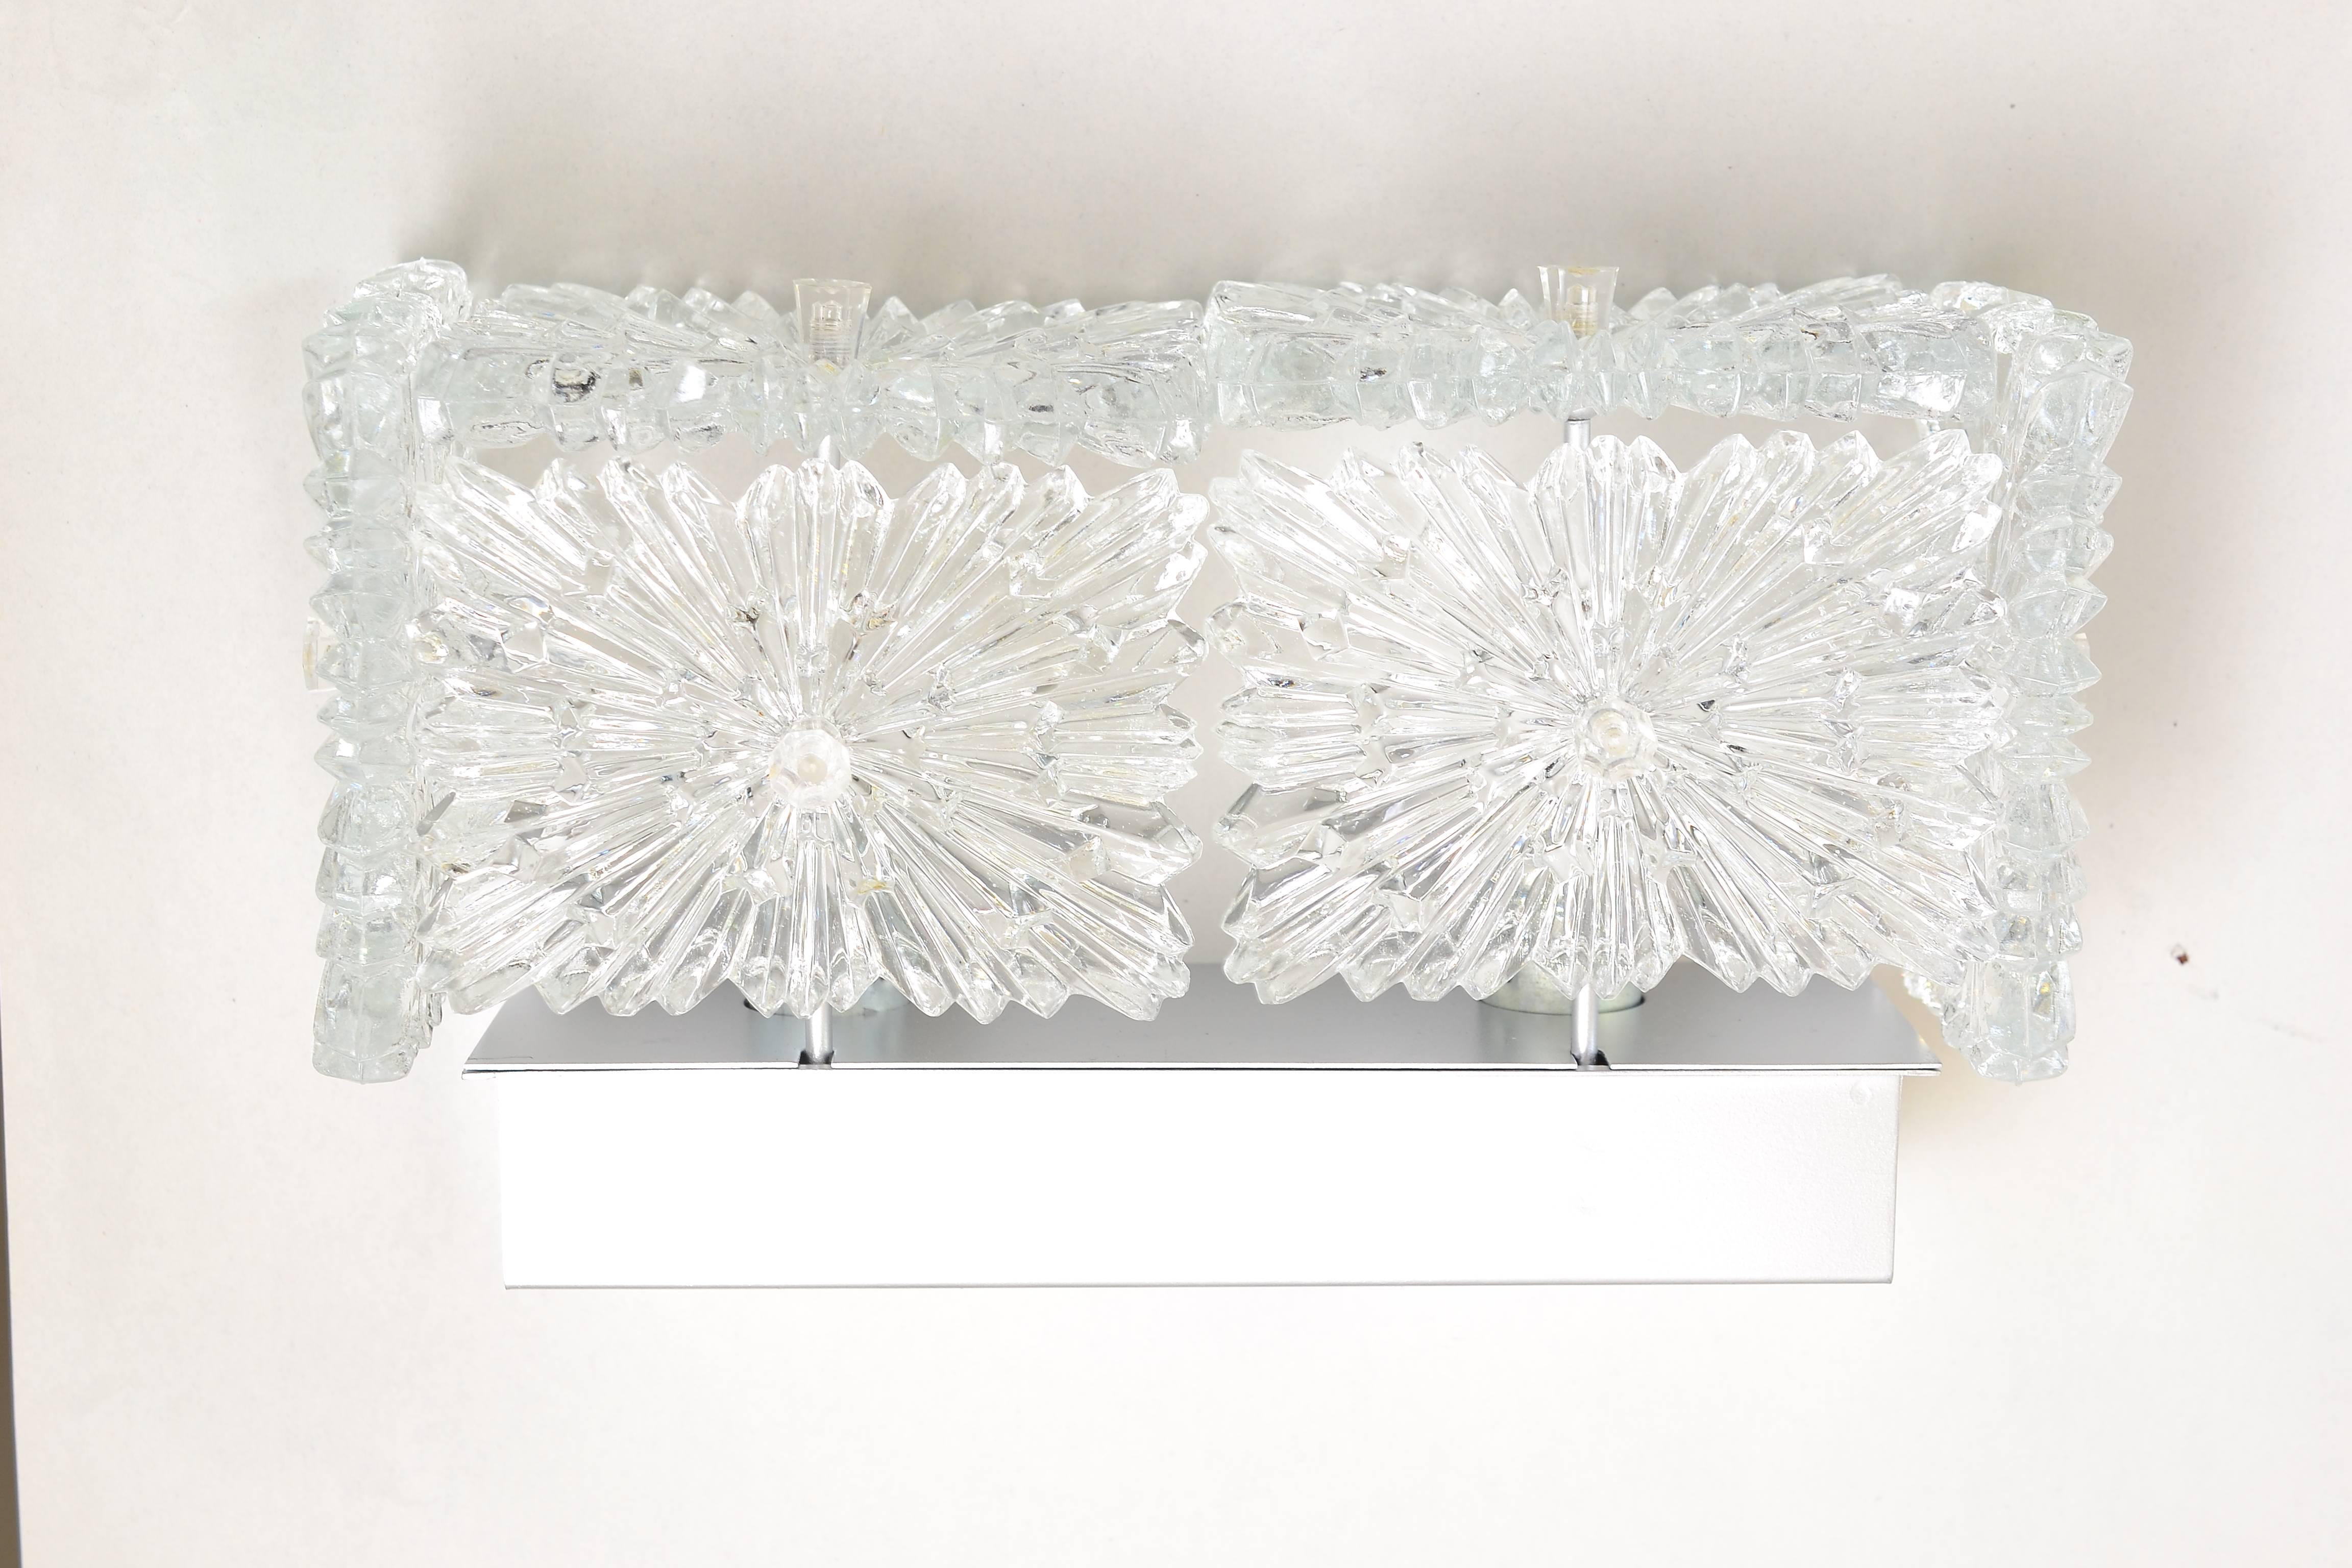 Pair Large Crystal Glass Wall Sconces Lamps by Kinkeldey
bove are the same lamps only the size are different
the size of the small one is: 
H: 9cm
W: 26cm
D: 15cm